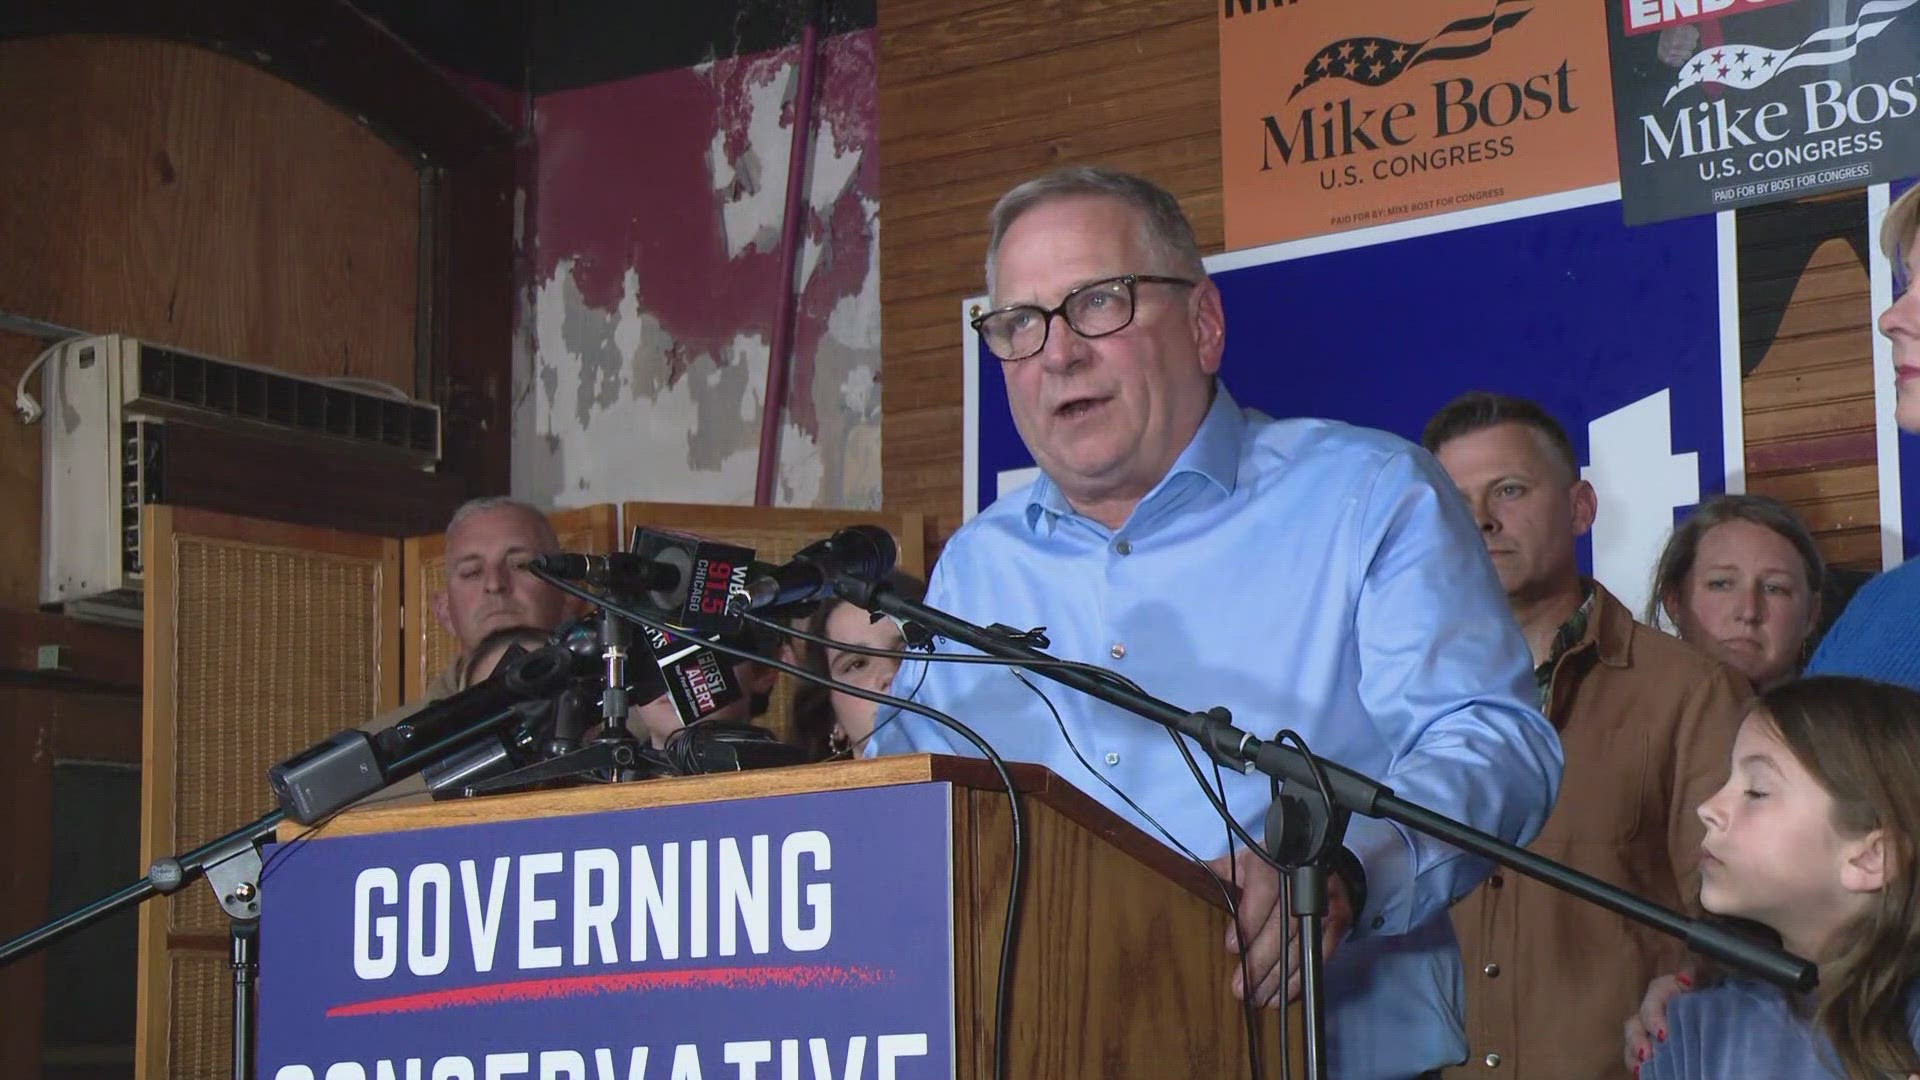 Four-term U.S. Rep. Mike Bost declared victory against challenger Darren Bailey in Tuesday night's GOP primary race for Illinois' 12th District.